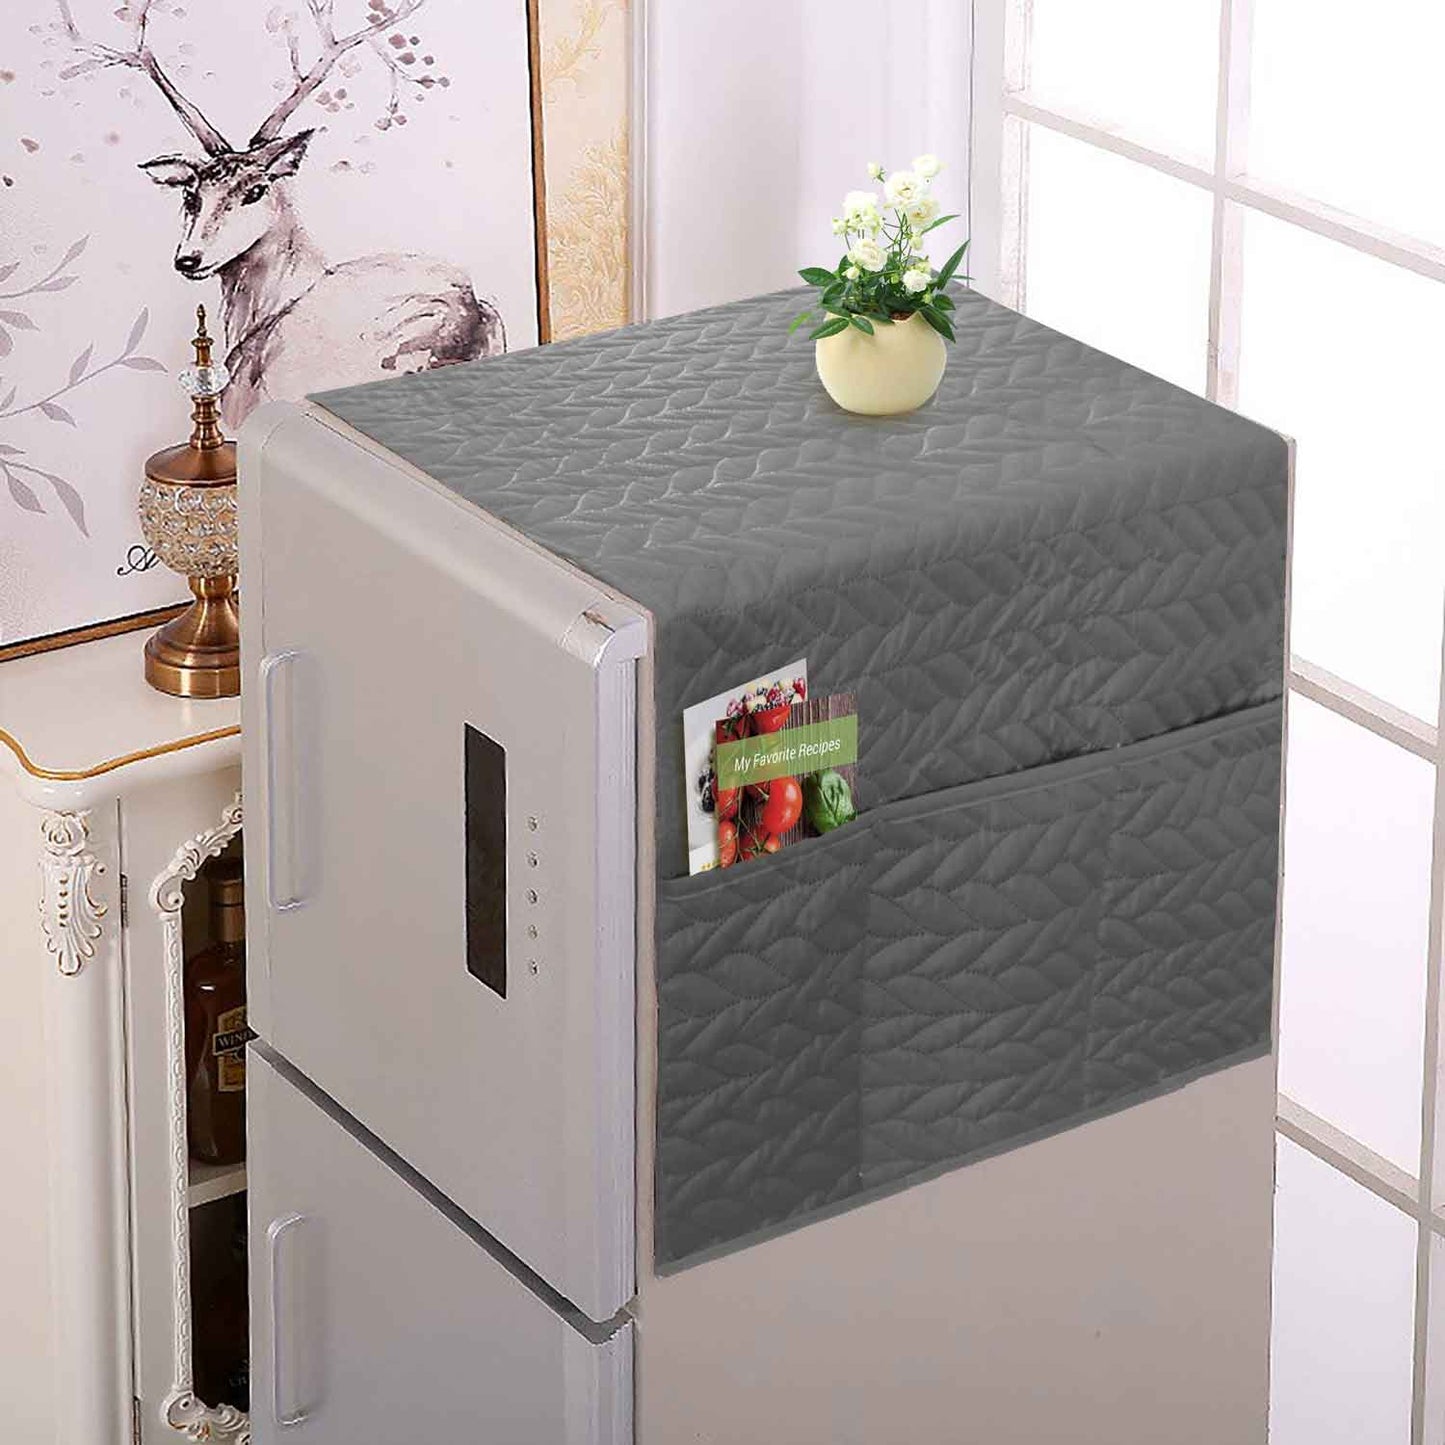 Dustproof Quilted Refrigerator Cover With Side Pockets-Grey